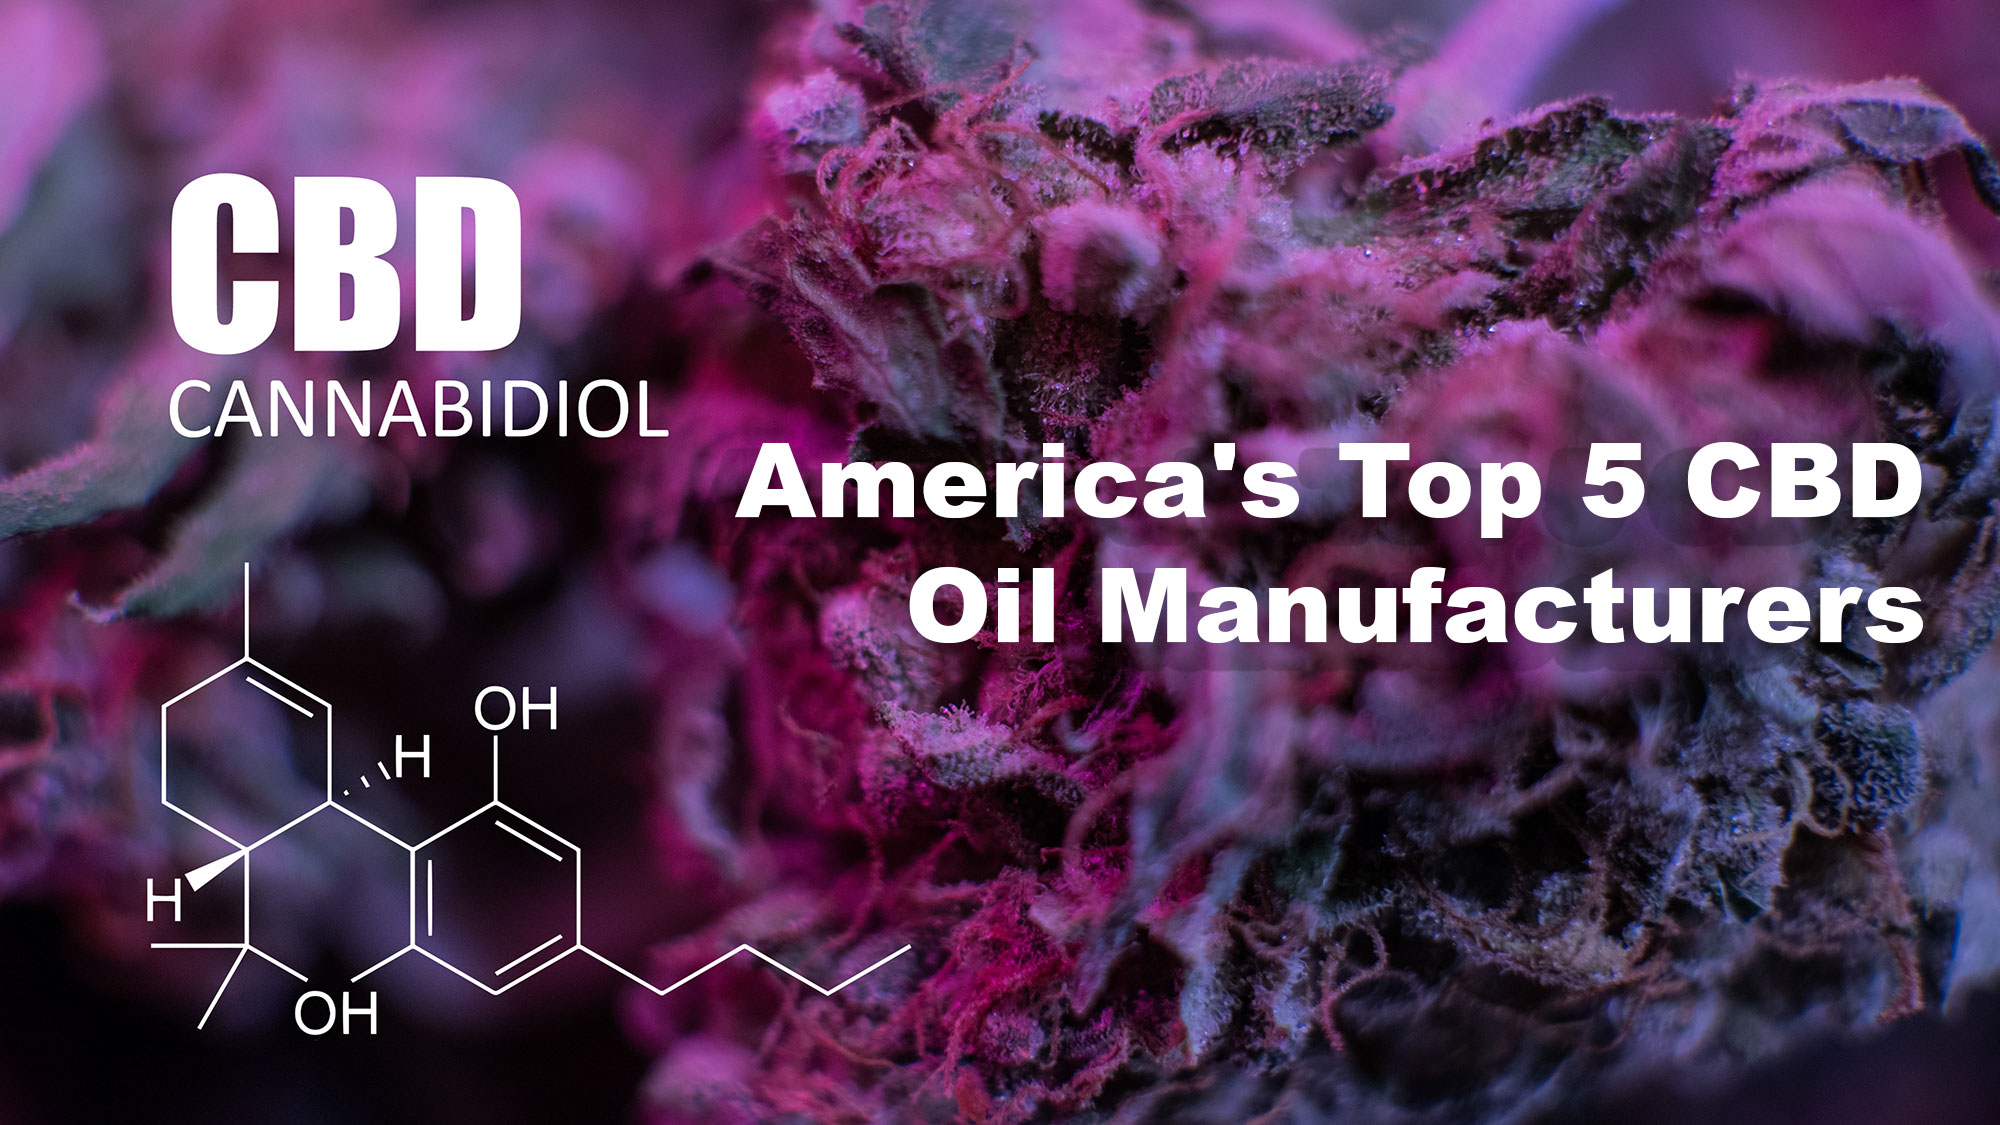 Organic CBD Oil - America's Top 5 CBD Oil Manufacturers and How to Choose the Right One